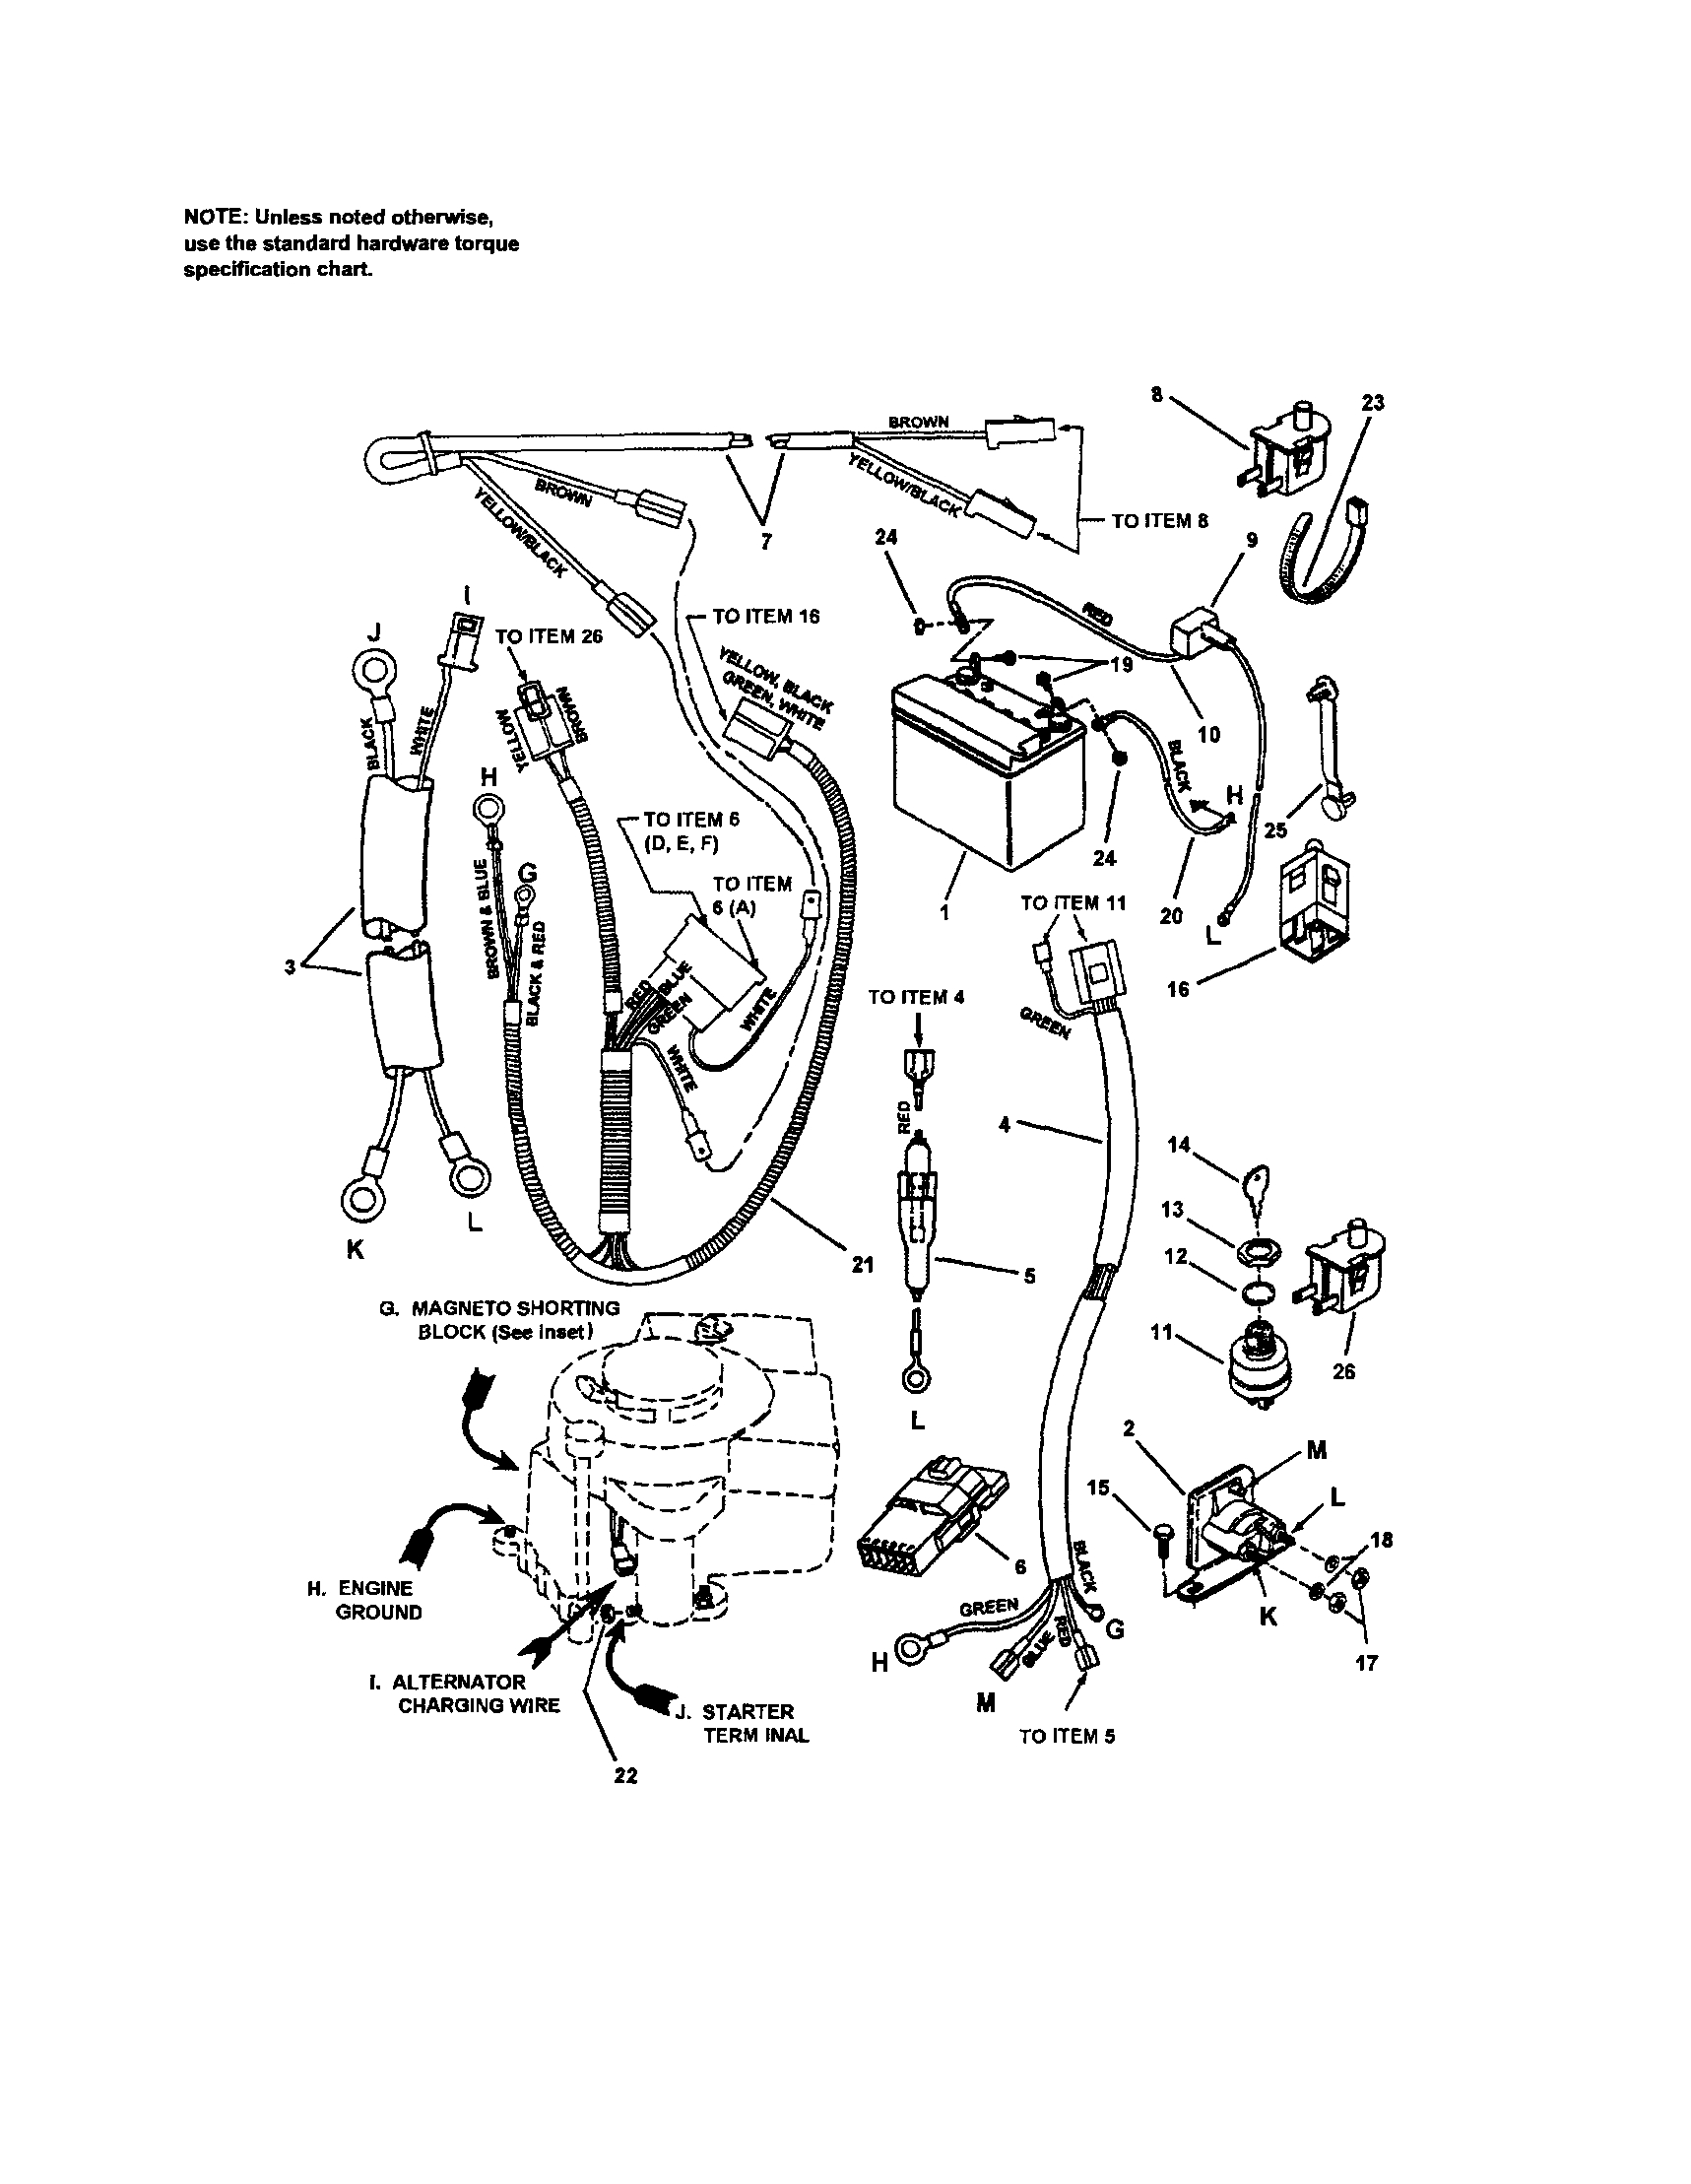 14 Hp Briggs And Stratton Wiring Diagram | Wiring Diagram - Briggs And Stratton Wiring Diagram 14Hp